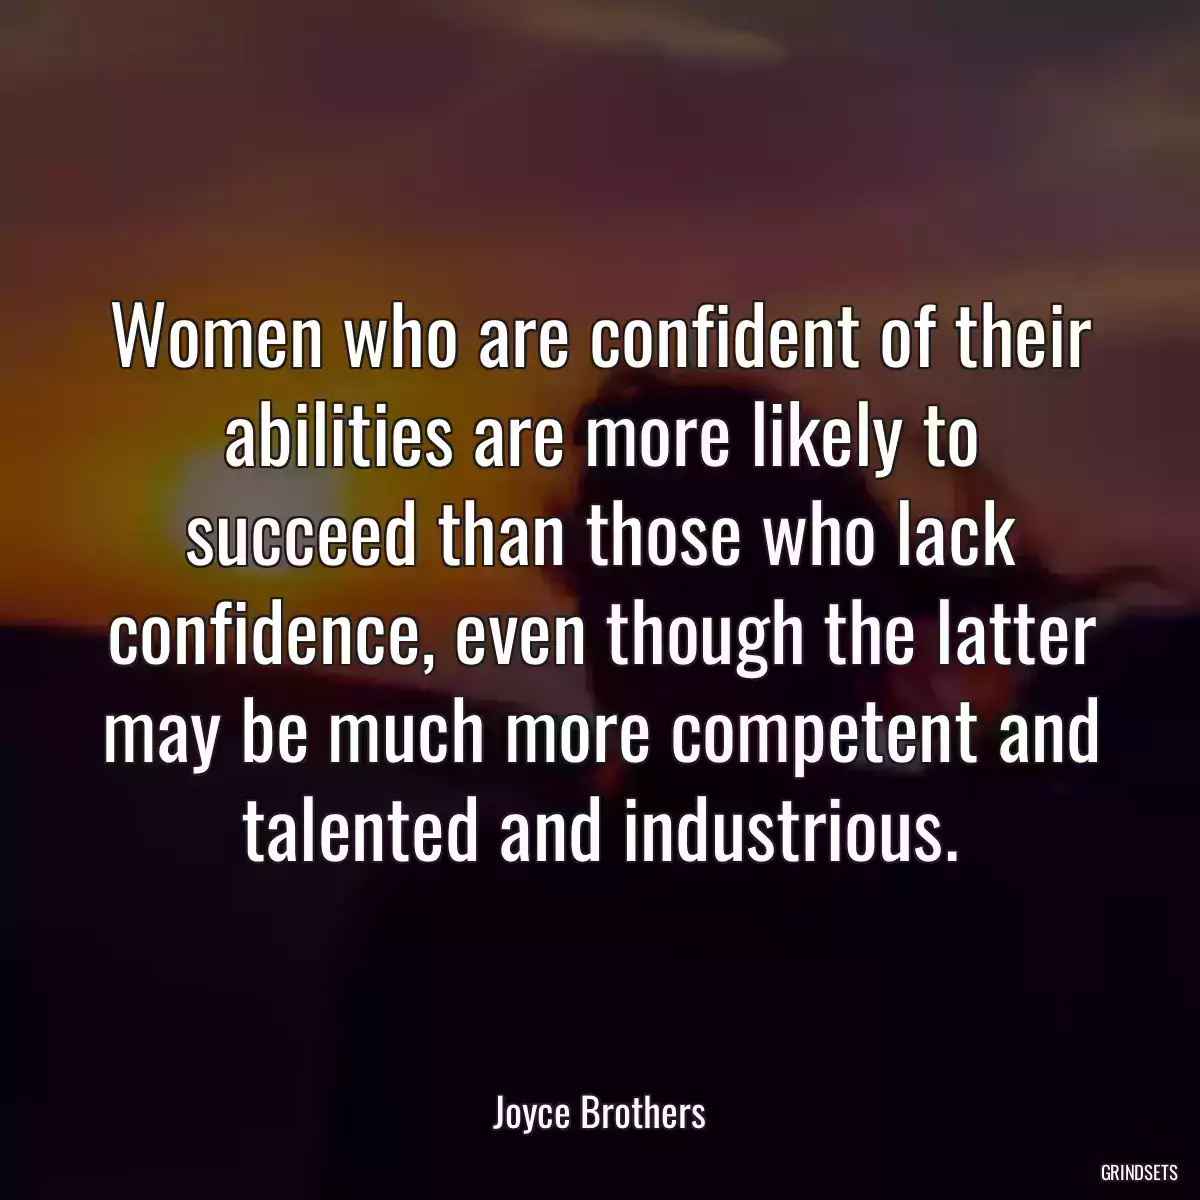 Women who are confident of their abilities are more likely to succeed than those who lack confidence, even though the latter may be much more competent and talented and industrious.